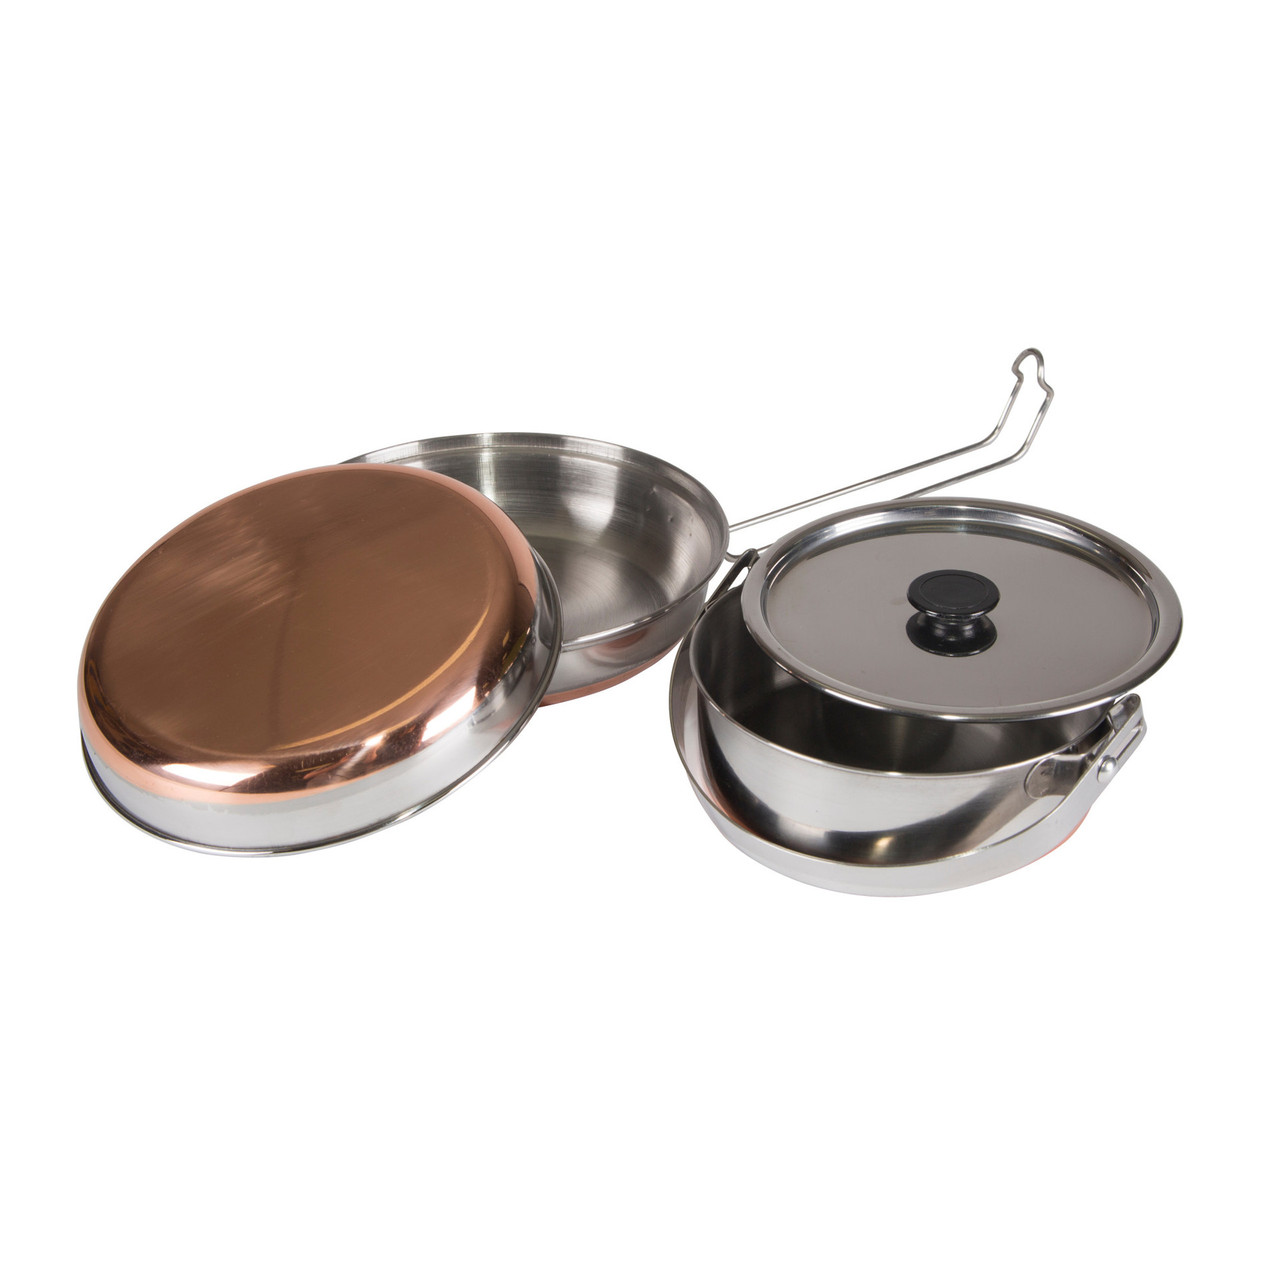 Stansport Stainless Steel Mess Kit with Copper Bottom